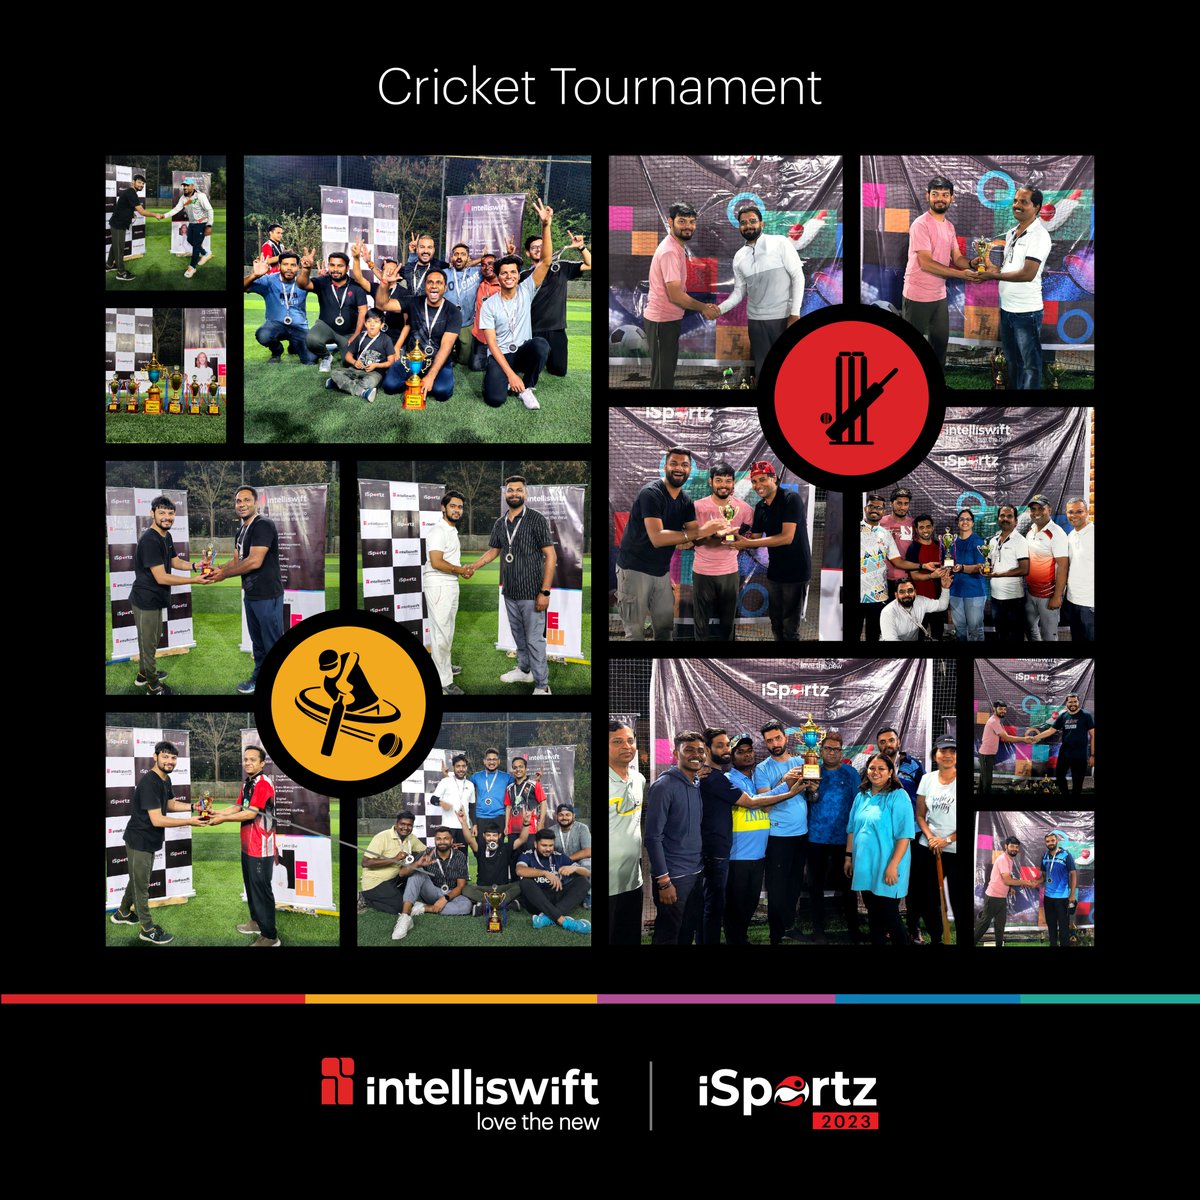 Our employees gave their all on the field at the recently concluded #iSportz Cricket Tournament.🏏 It was an absolute delight to watch them shine – check out our amazing winners!🏆

#CricketTournament #Sportsevents #Worklifebalance #Cricket #Sports